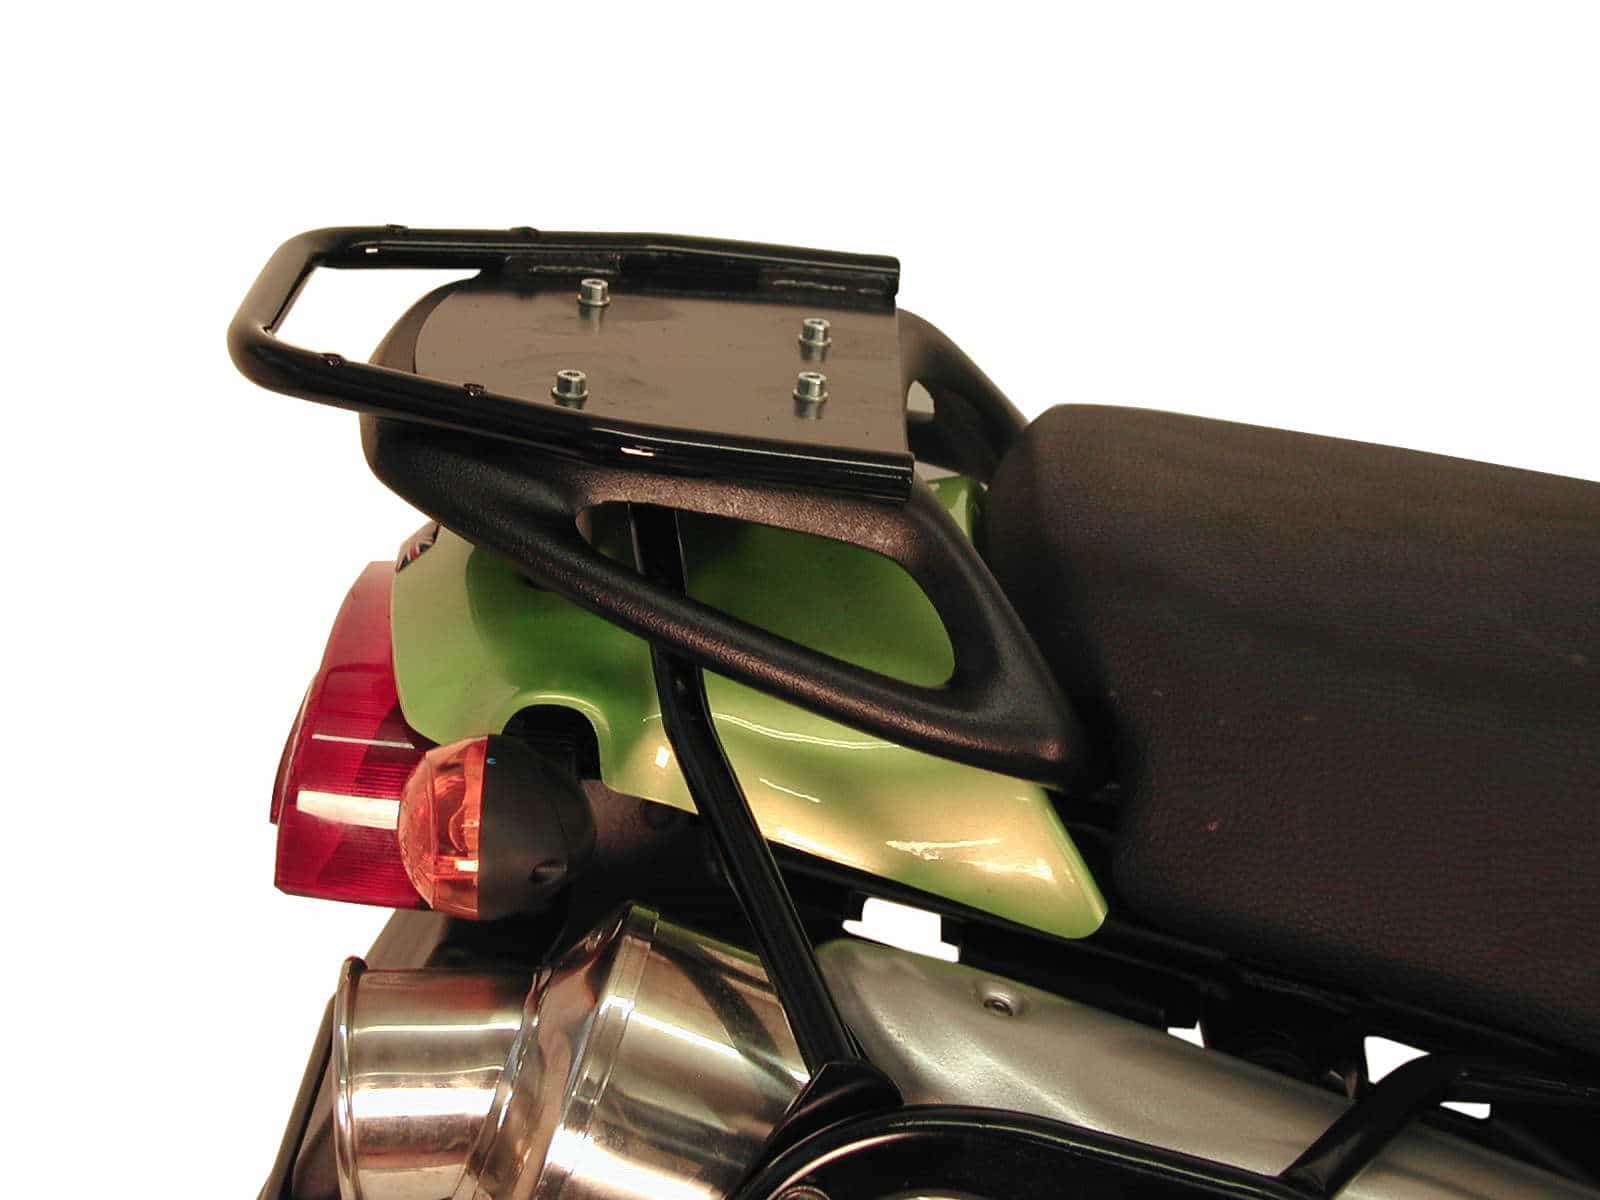 Topcase carrier tube-type black for Triumph Tiger (1993-1998) (please tell year of production)